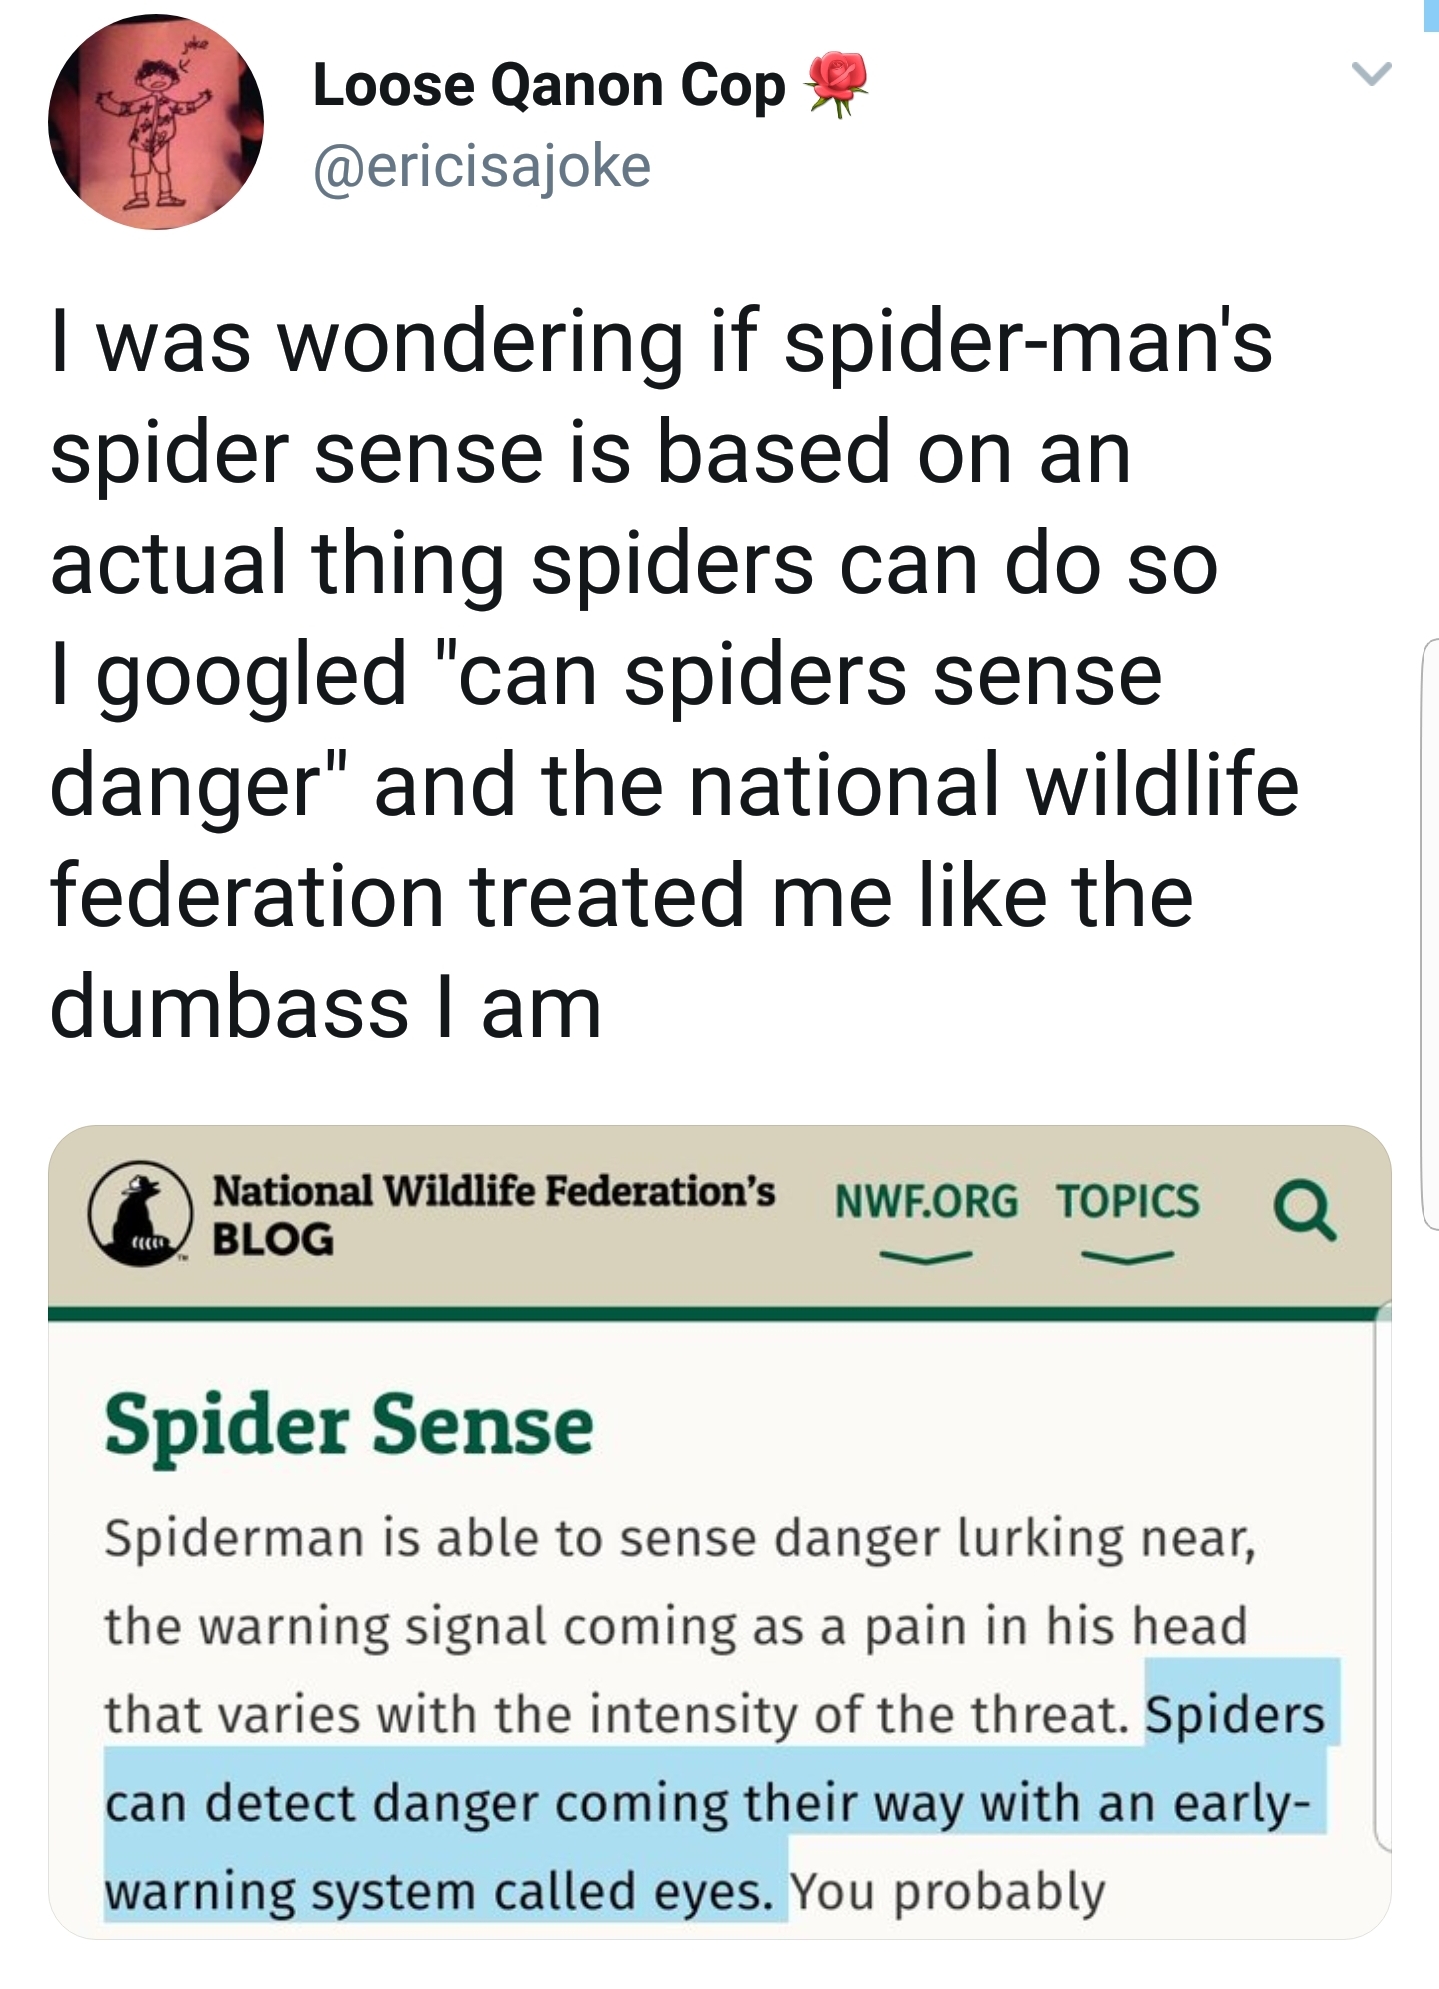 document - Loose Qanon Copo I was wondering if spiderman's spider sense is based on an actual thing spiders can do so I googled "can spiders sense danger" and the national wildlife federation treated me the dumbass I am National Wildlife Federation's Nwf.